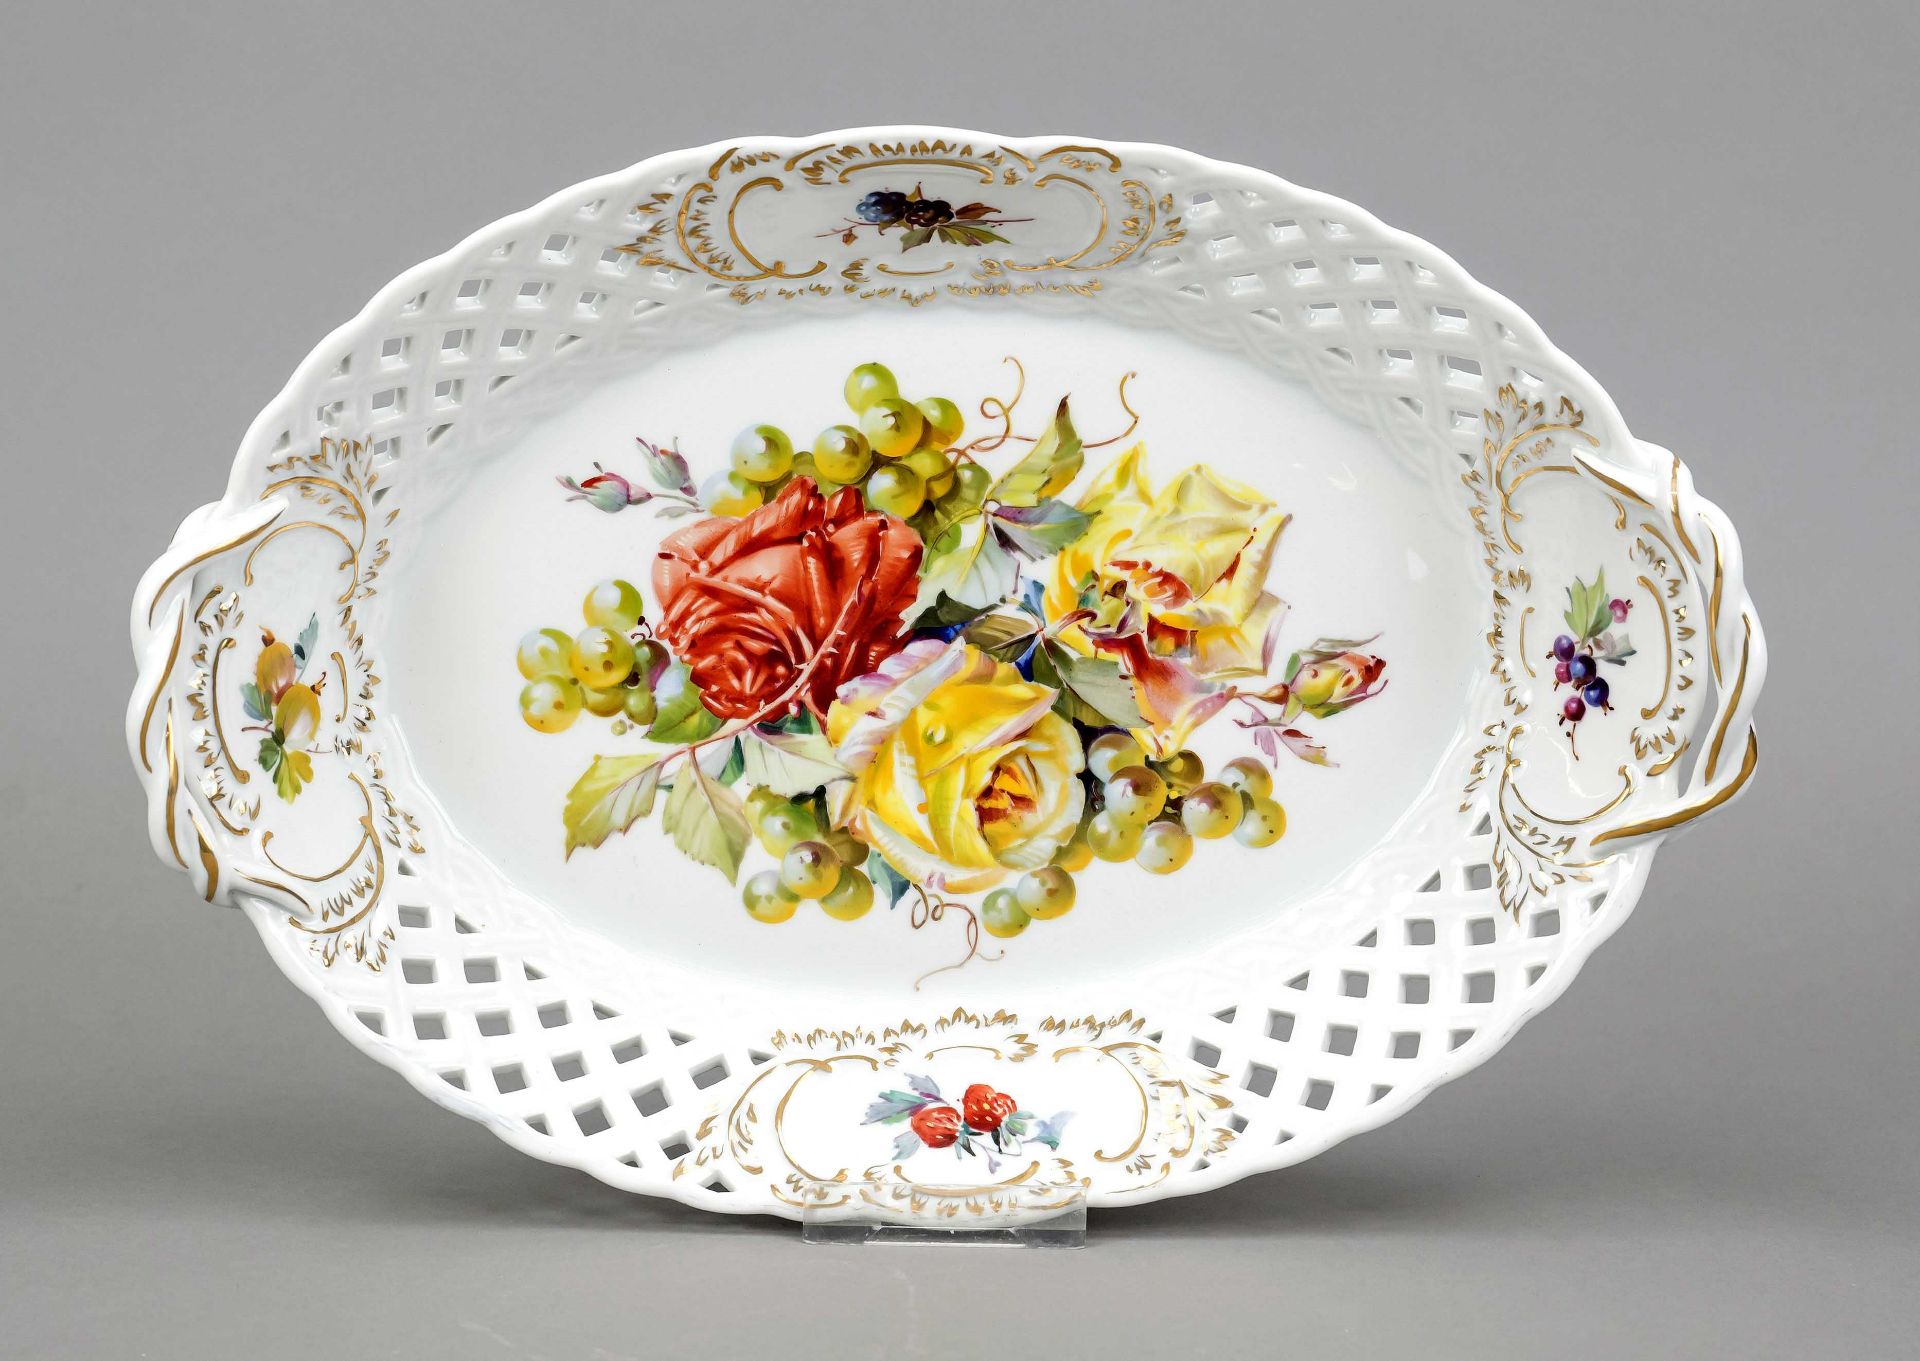 Oval basket bowl, Meissen, after 1973, deputation, elaborate rose painting, combined with berry